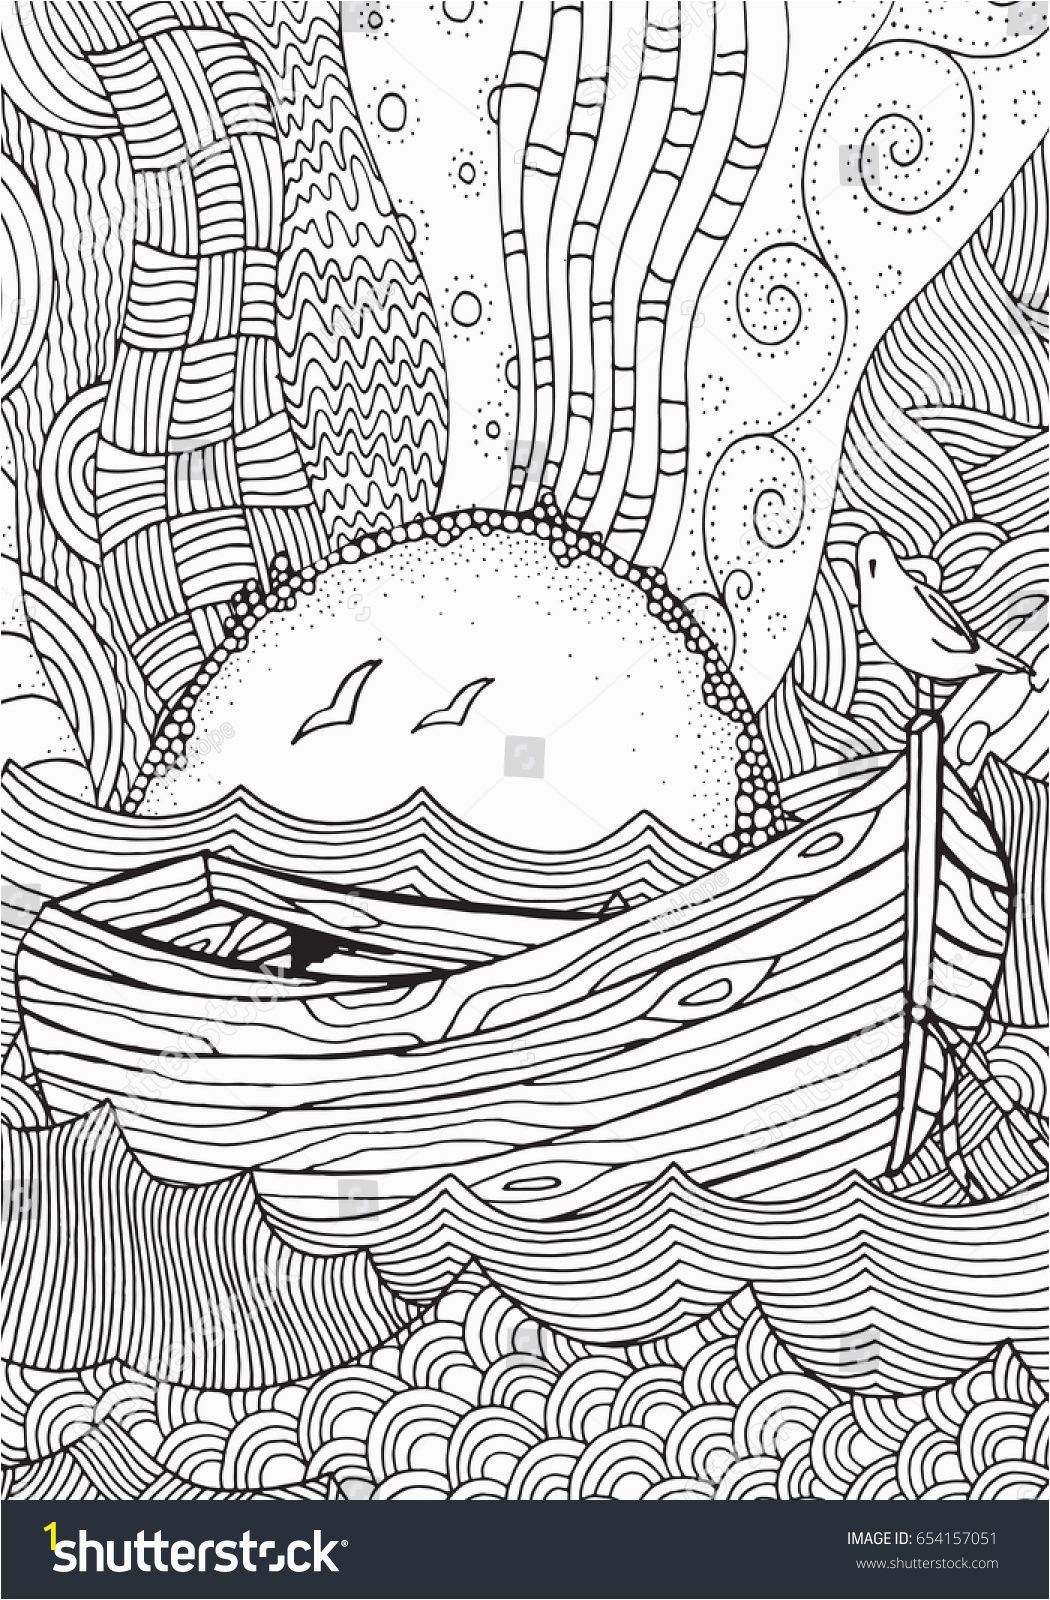 Ocean Waves Coloring Pages Wooden Boat Floating On the Waves Waves Boat Sea Art